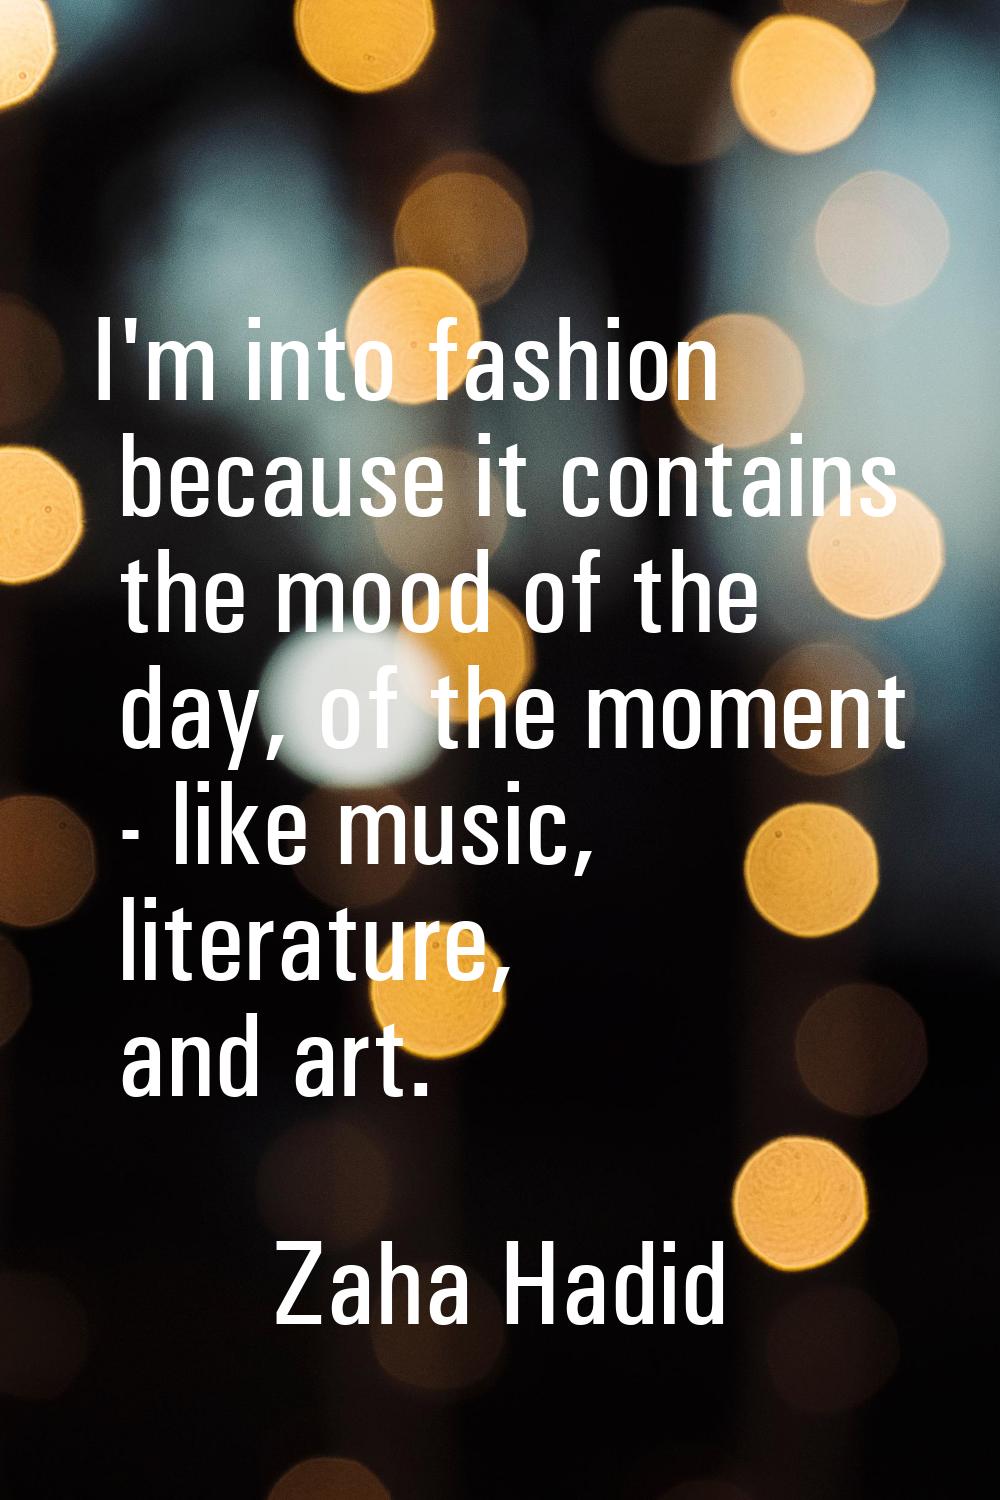 I'm into fashion because it contains the mood of the day, of the moment - like music, literature, a